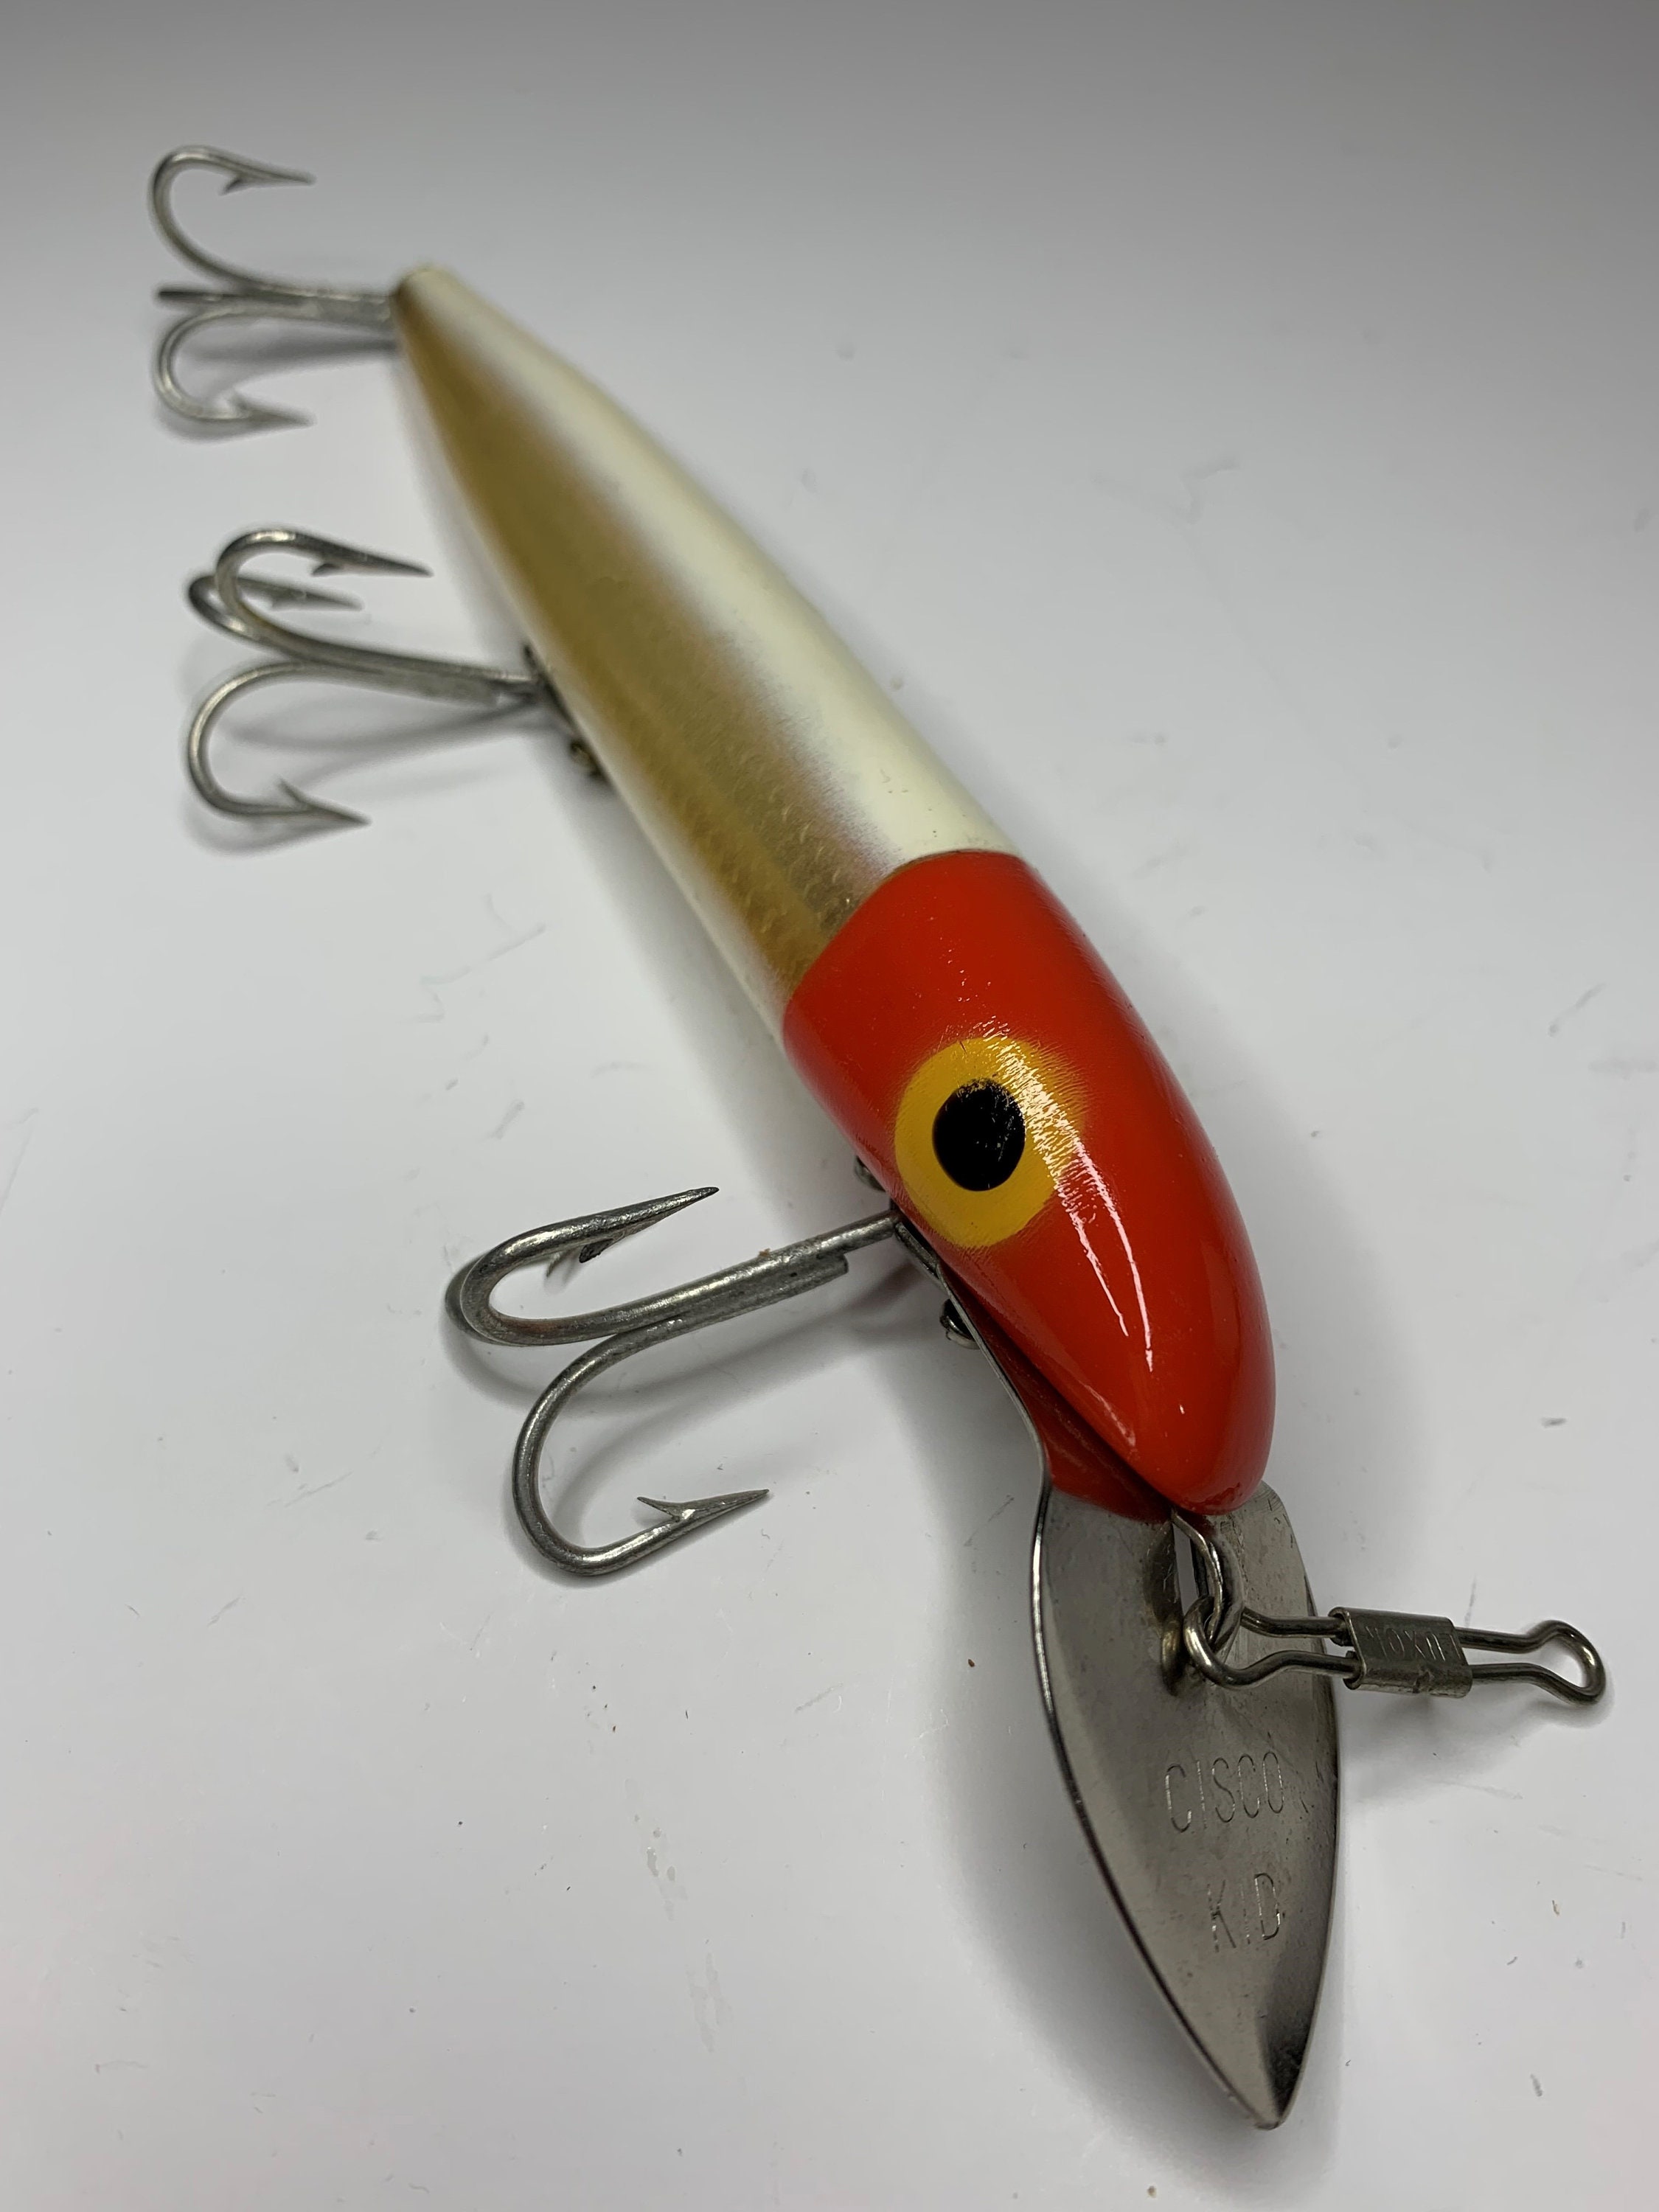 Vintage Fishing Lure 1969 HUSKY CISCO KID 600 S Gift for Dad 